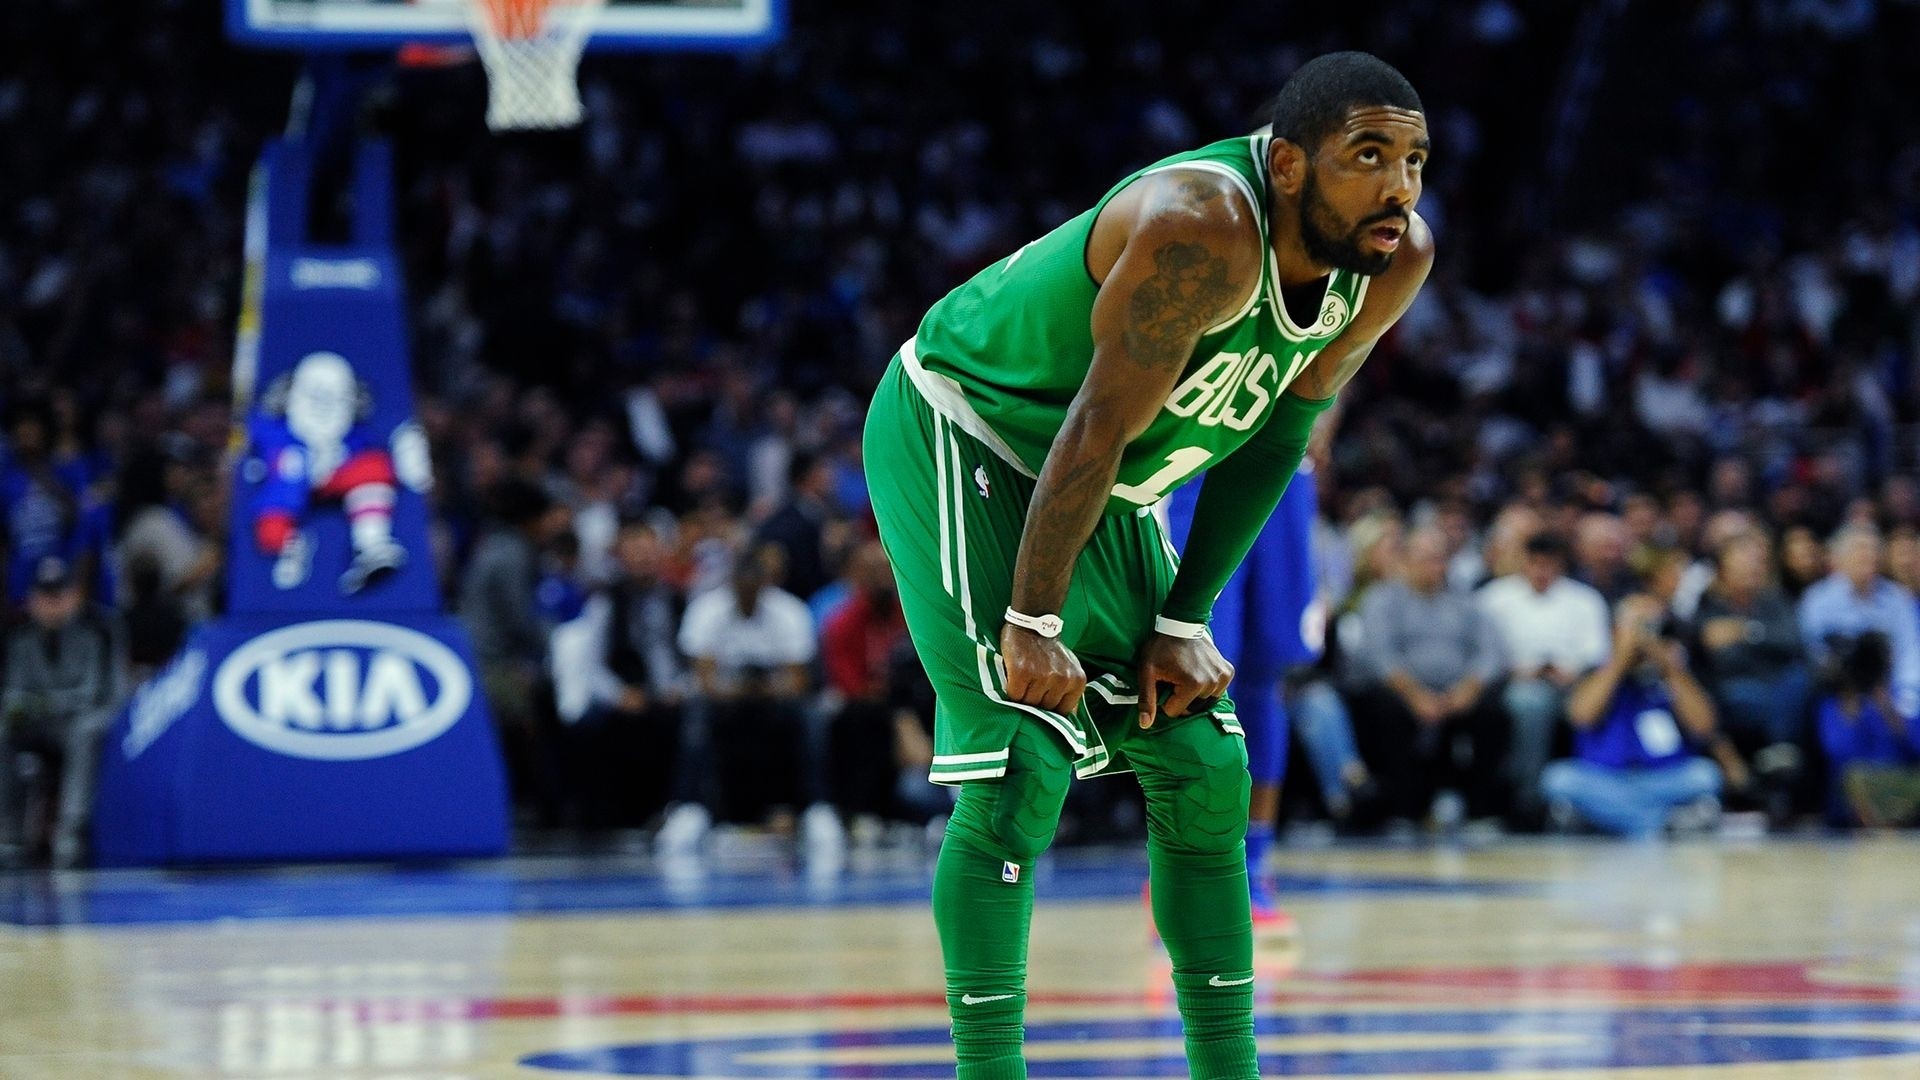 1920x1080 Title : 1080p kyrie irving full hd wallpapers and pictures – 1080p.  Dimension : 1920 x 1080. File Type : JPG/JPEG